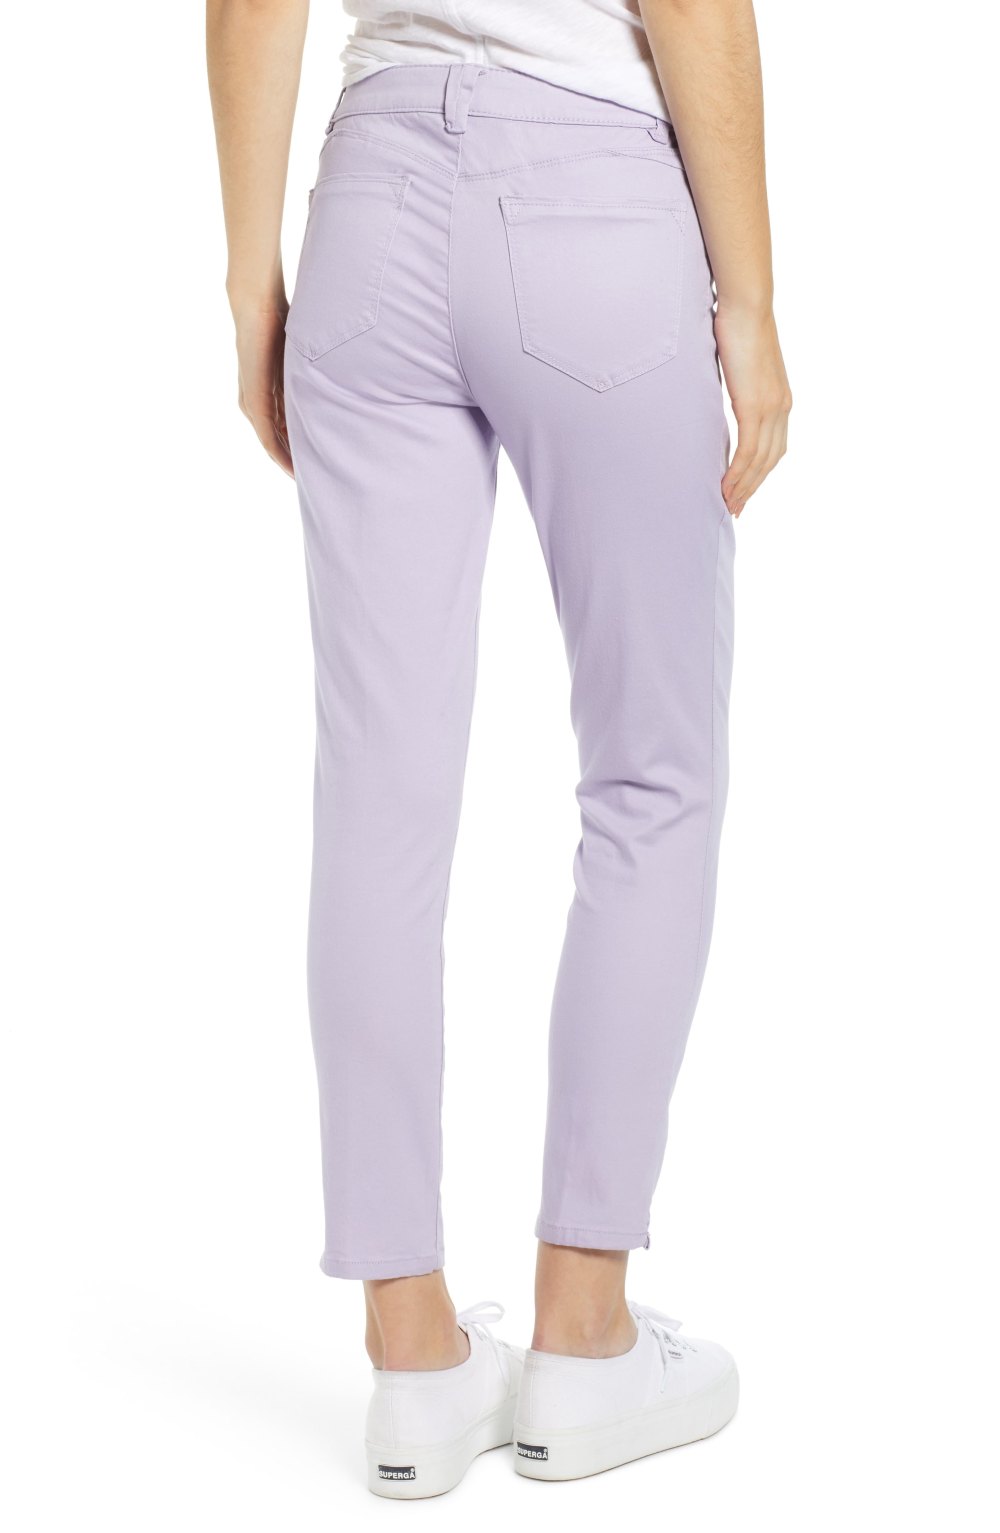 Wit & Wisdom Ab-Solution High Waist Ankle Skinny Pants (Lavender Dust)